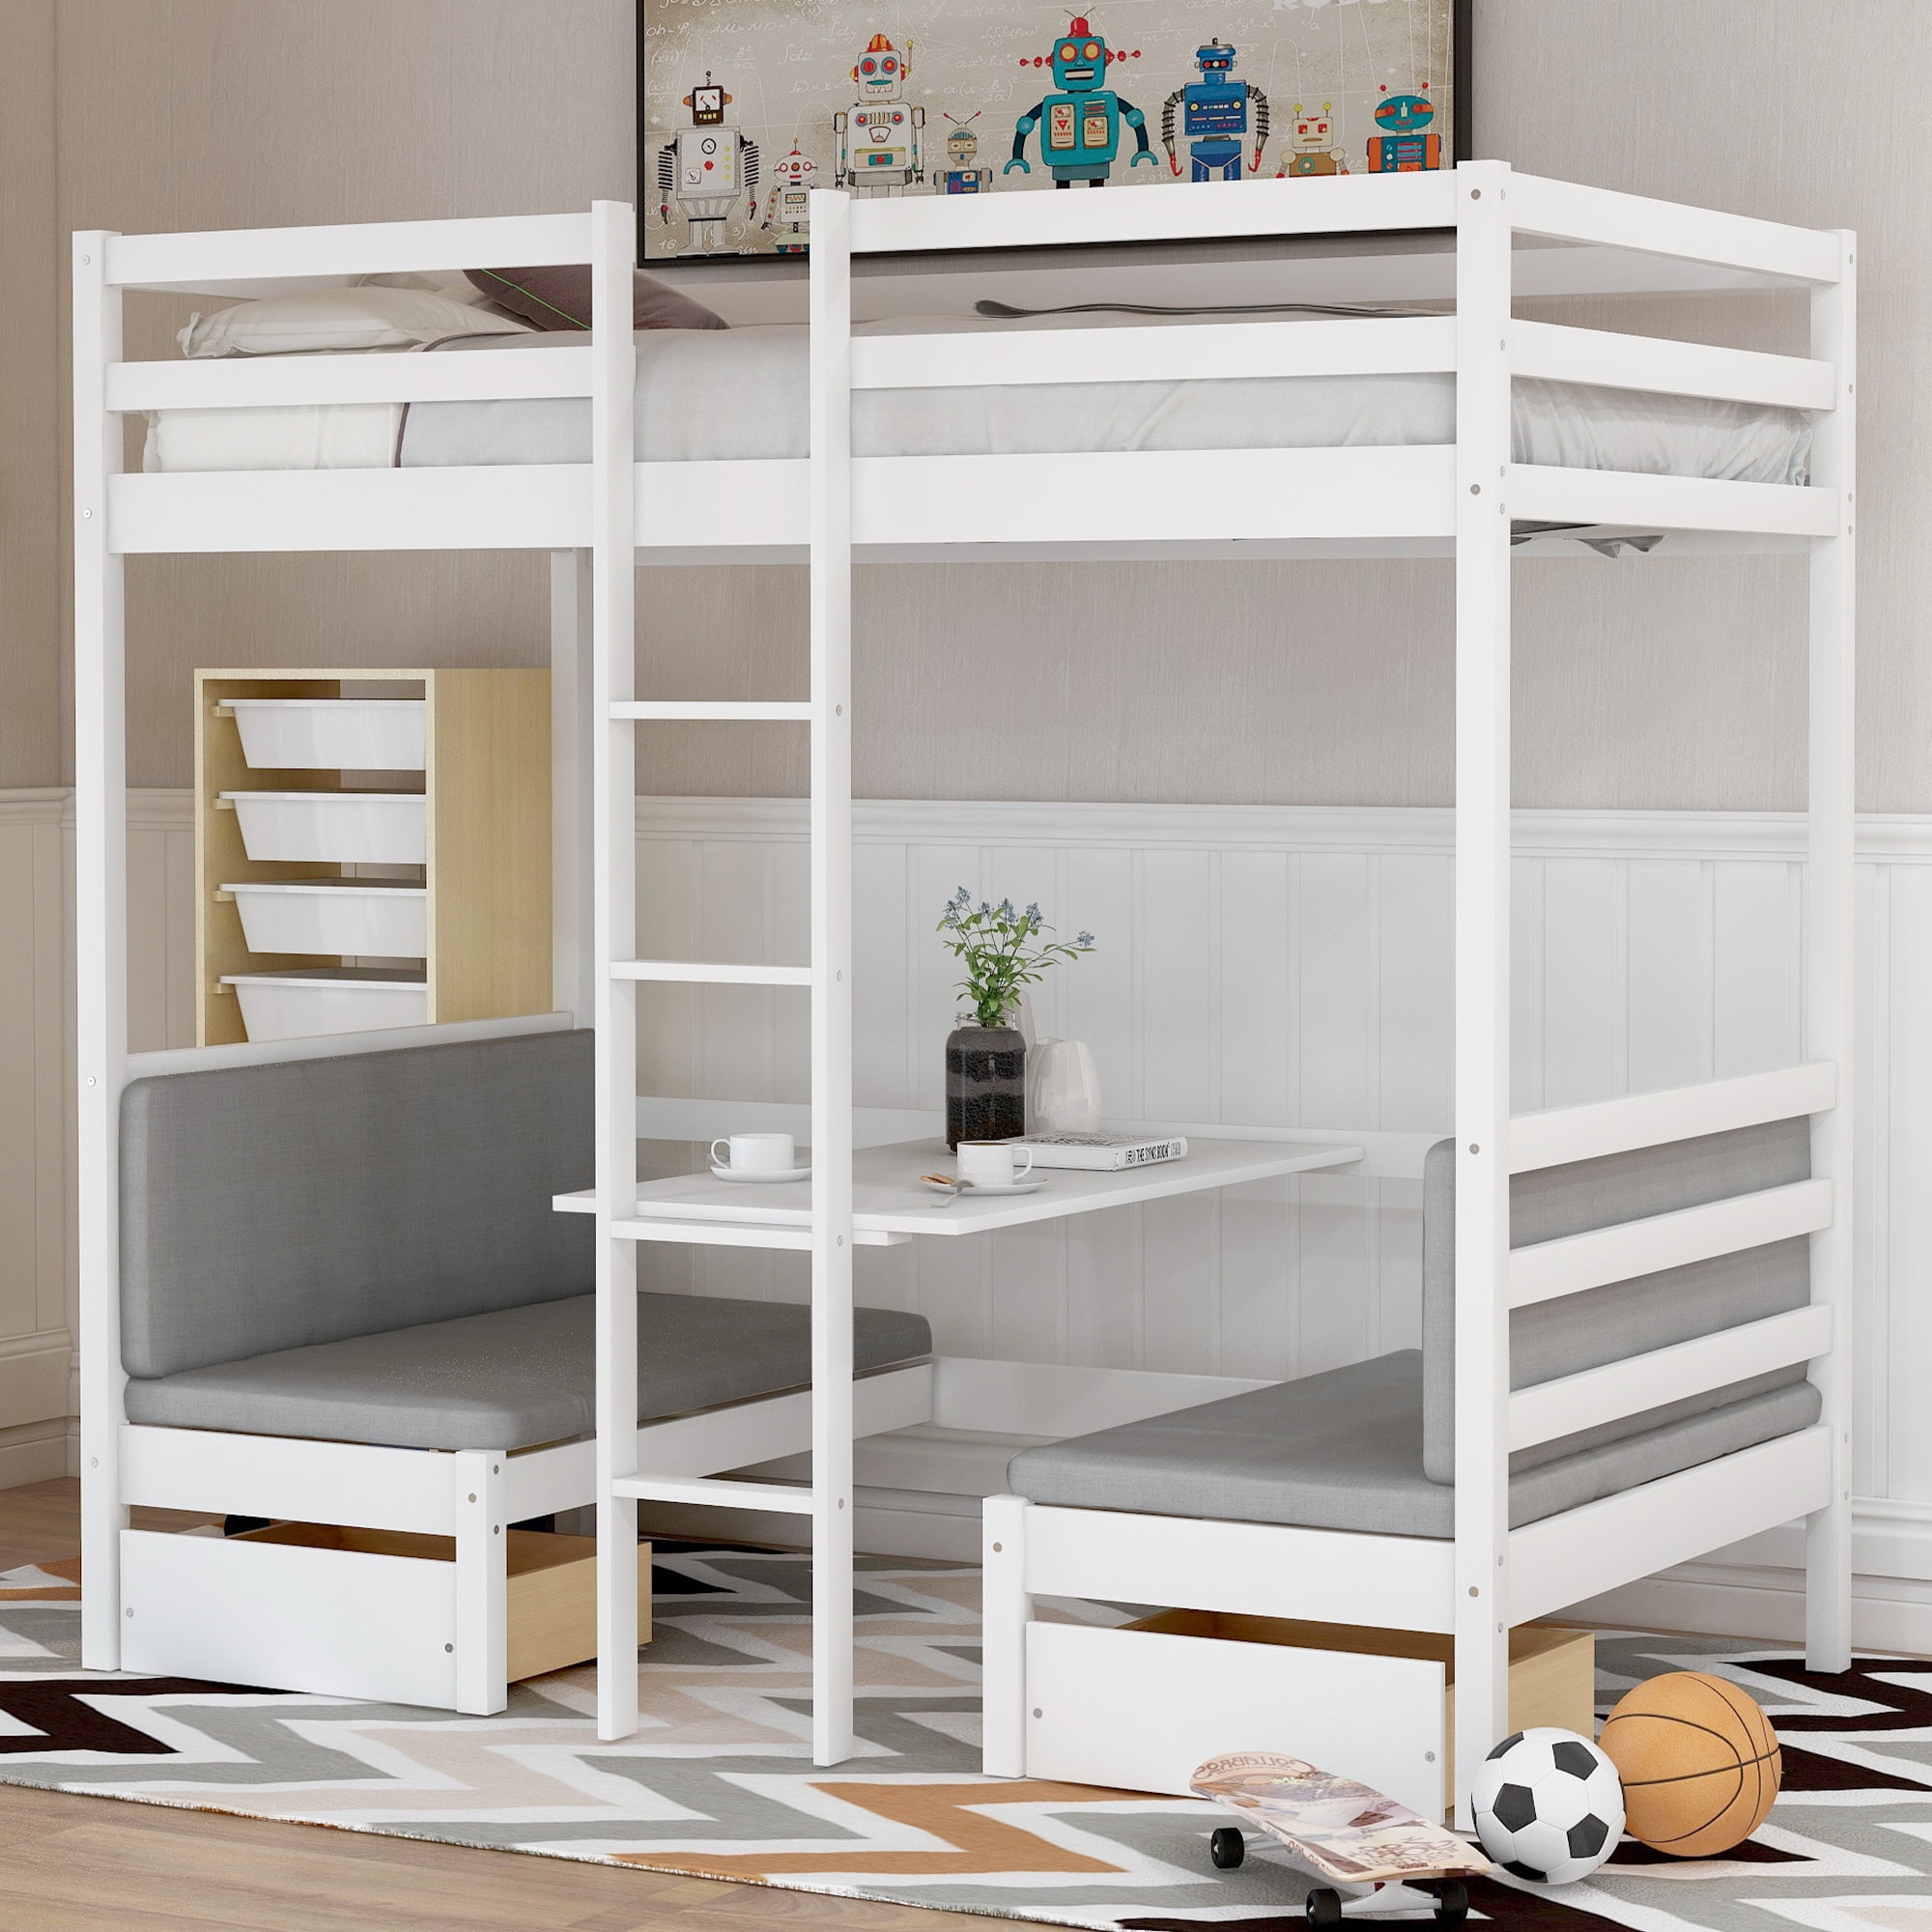 Euroco Solid Wood Convertible Twin Bunk, Wood Bunk Bed With Stairs And Desk